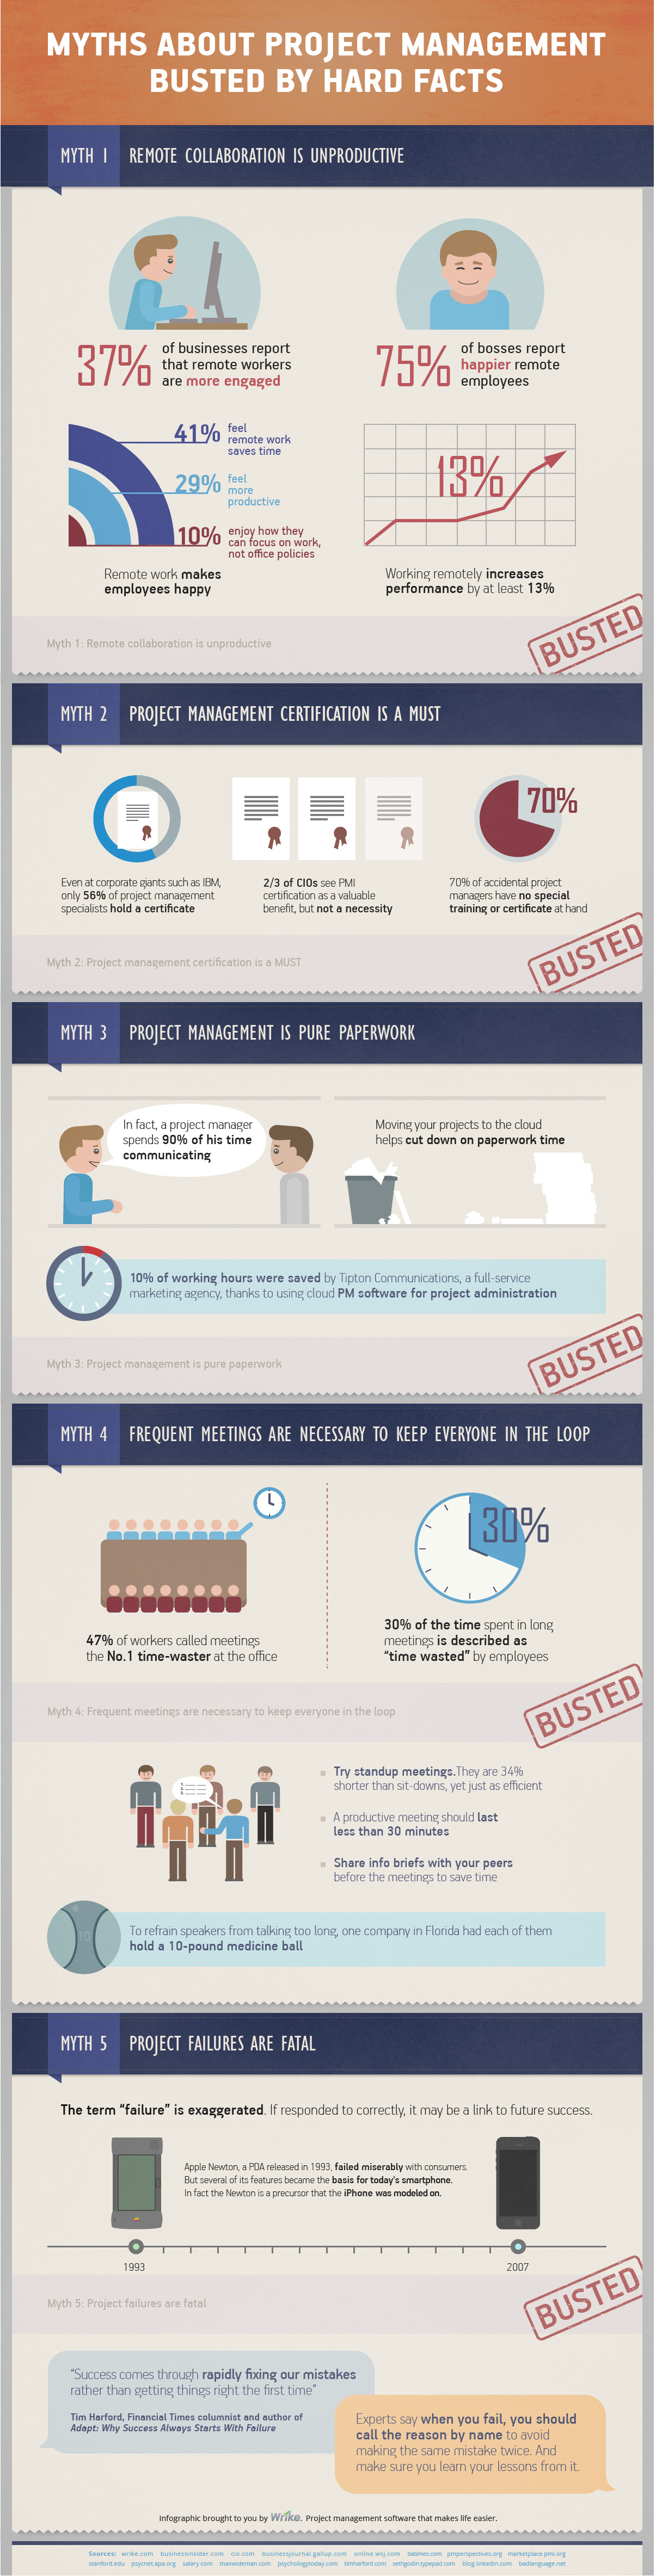 Myths About Project Management Busted By Hard Facts (Infographic) - Image 1